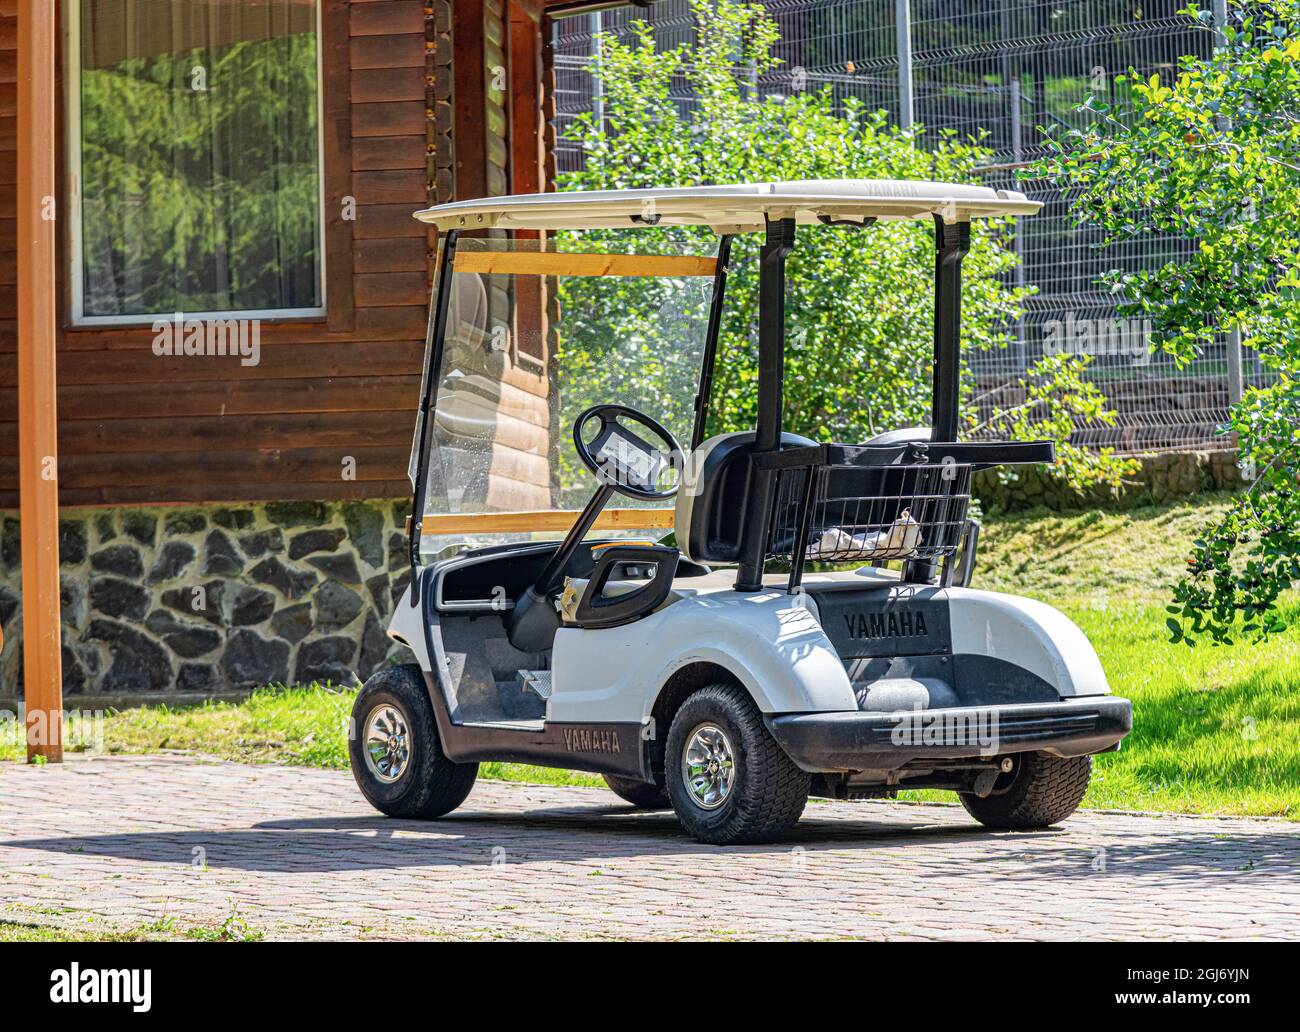 A Yamaha golf cart in front of a house in Voevodyno, Ukraine. Stock Photo